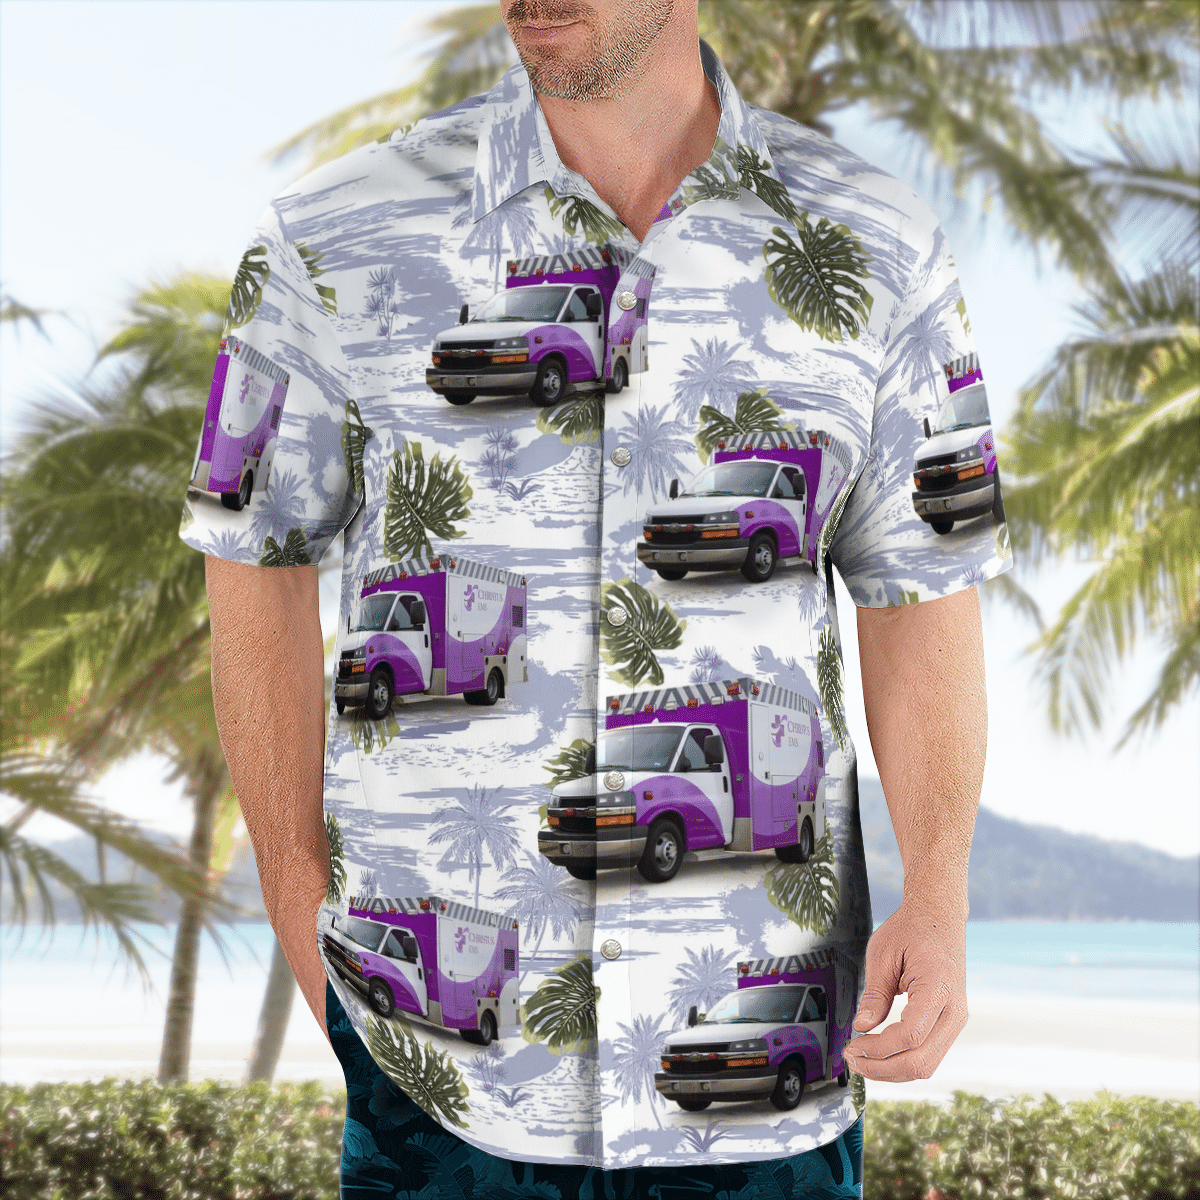 There are several styles of beach and Hawaiian shorts and tops to choose from 44